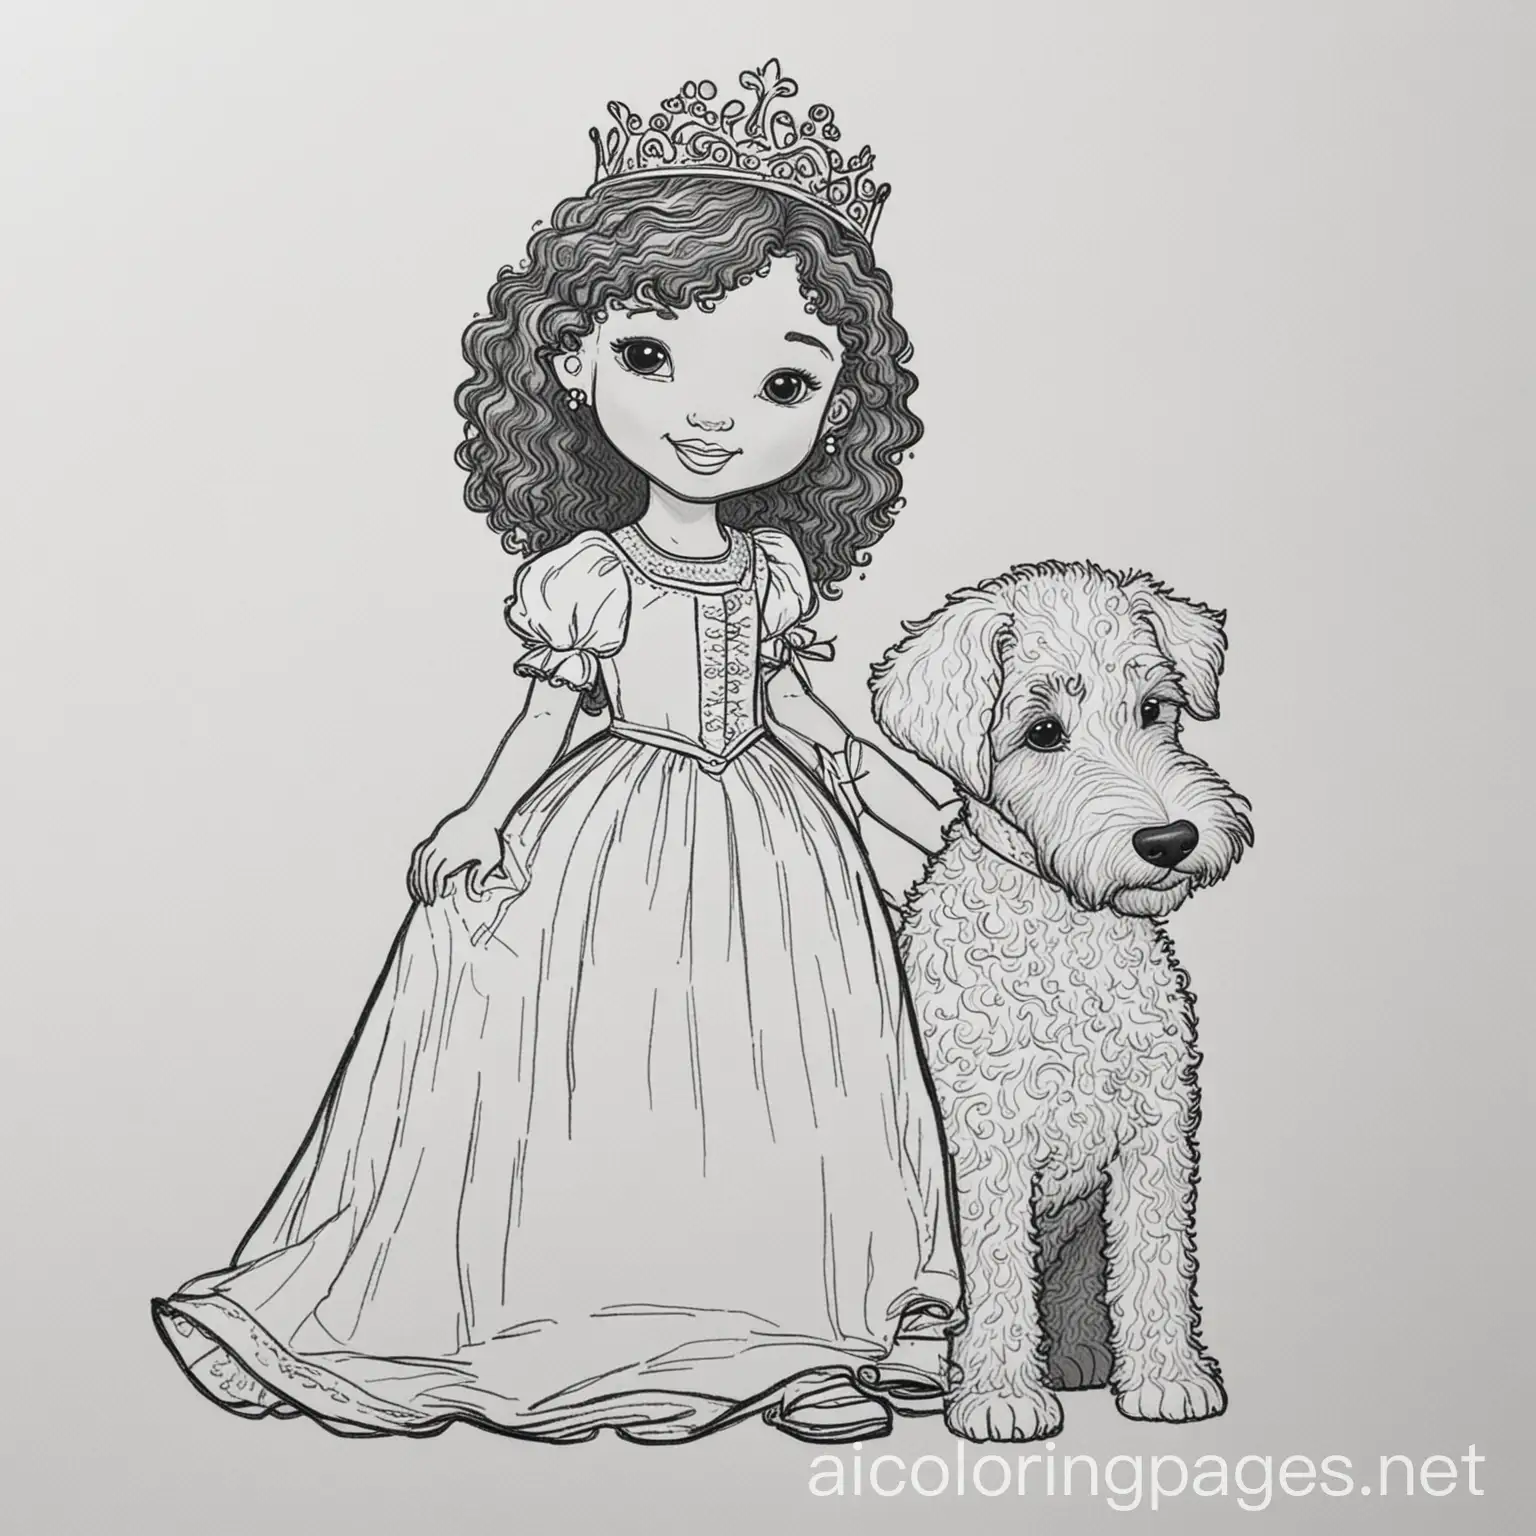 create a picture of a child African American princess with a labradoodle next to her, Coloring Page, black and white, line art, white background, Simplicity, Ample White Space. The background of the coloring page is plain white to make it easy for young children to color within the lines. The outlines of all the subjects are easy to distinguish, making it simple for kids to color without too much difficulty